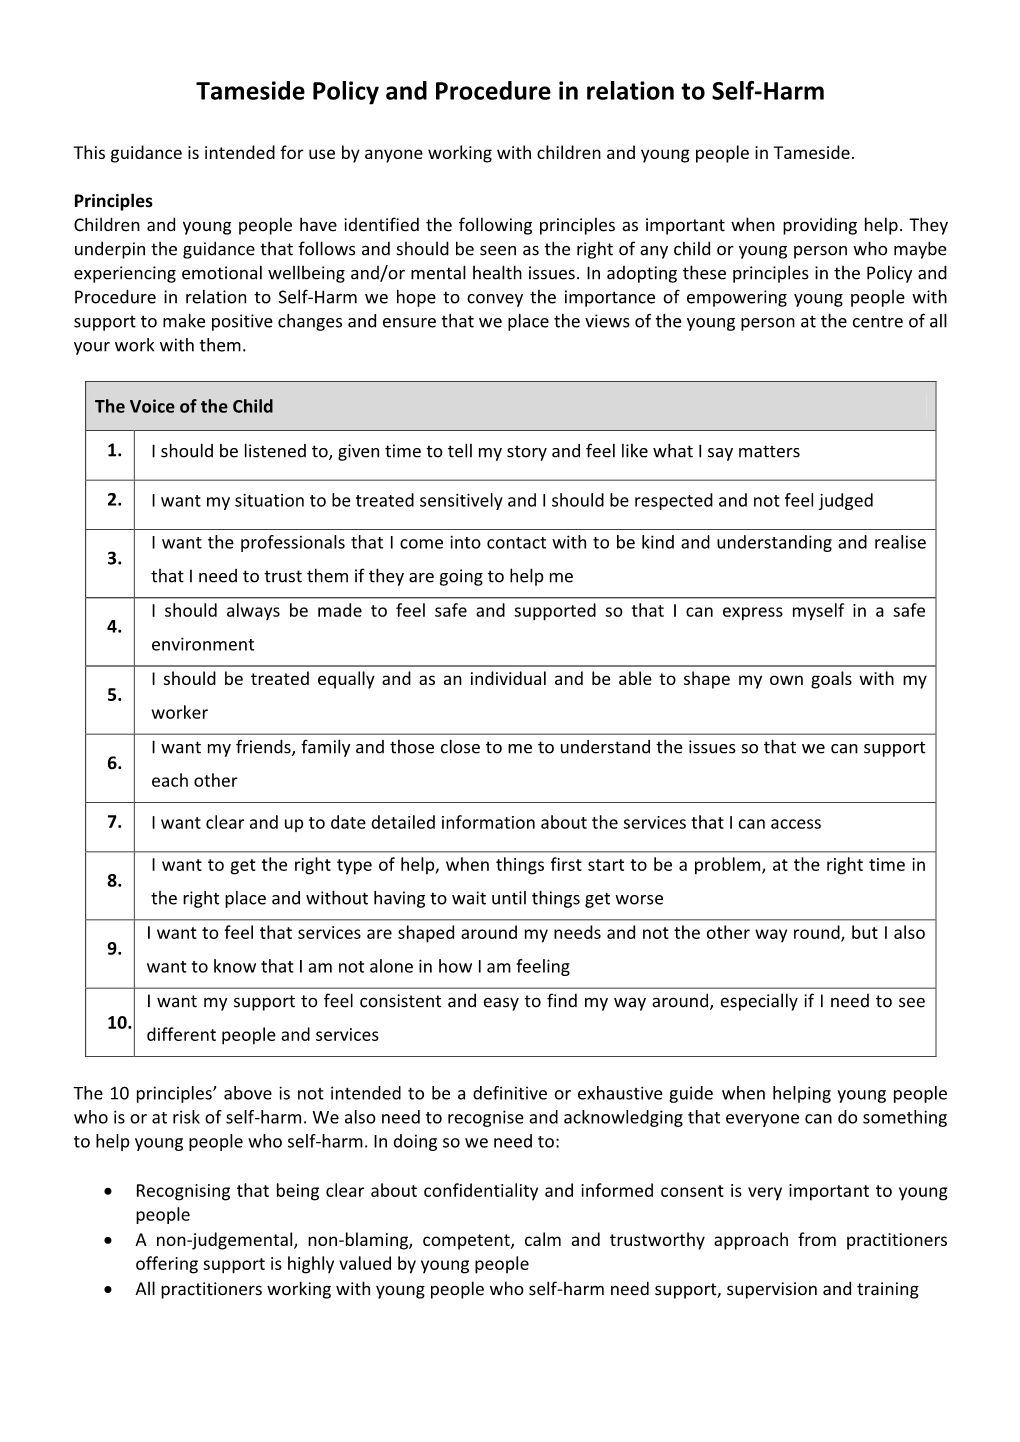 Tameside Policy and Procedure in Relation to Self-Harm